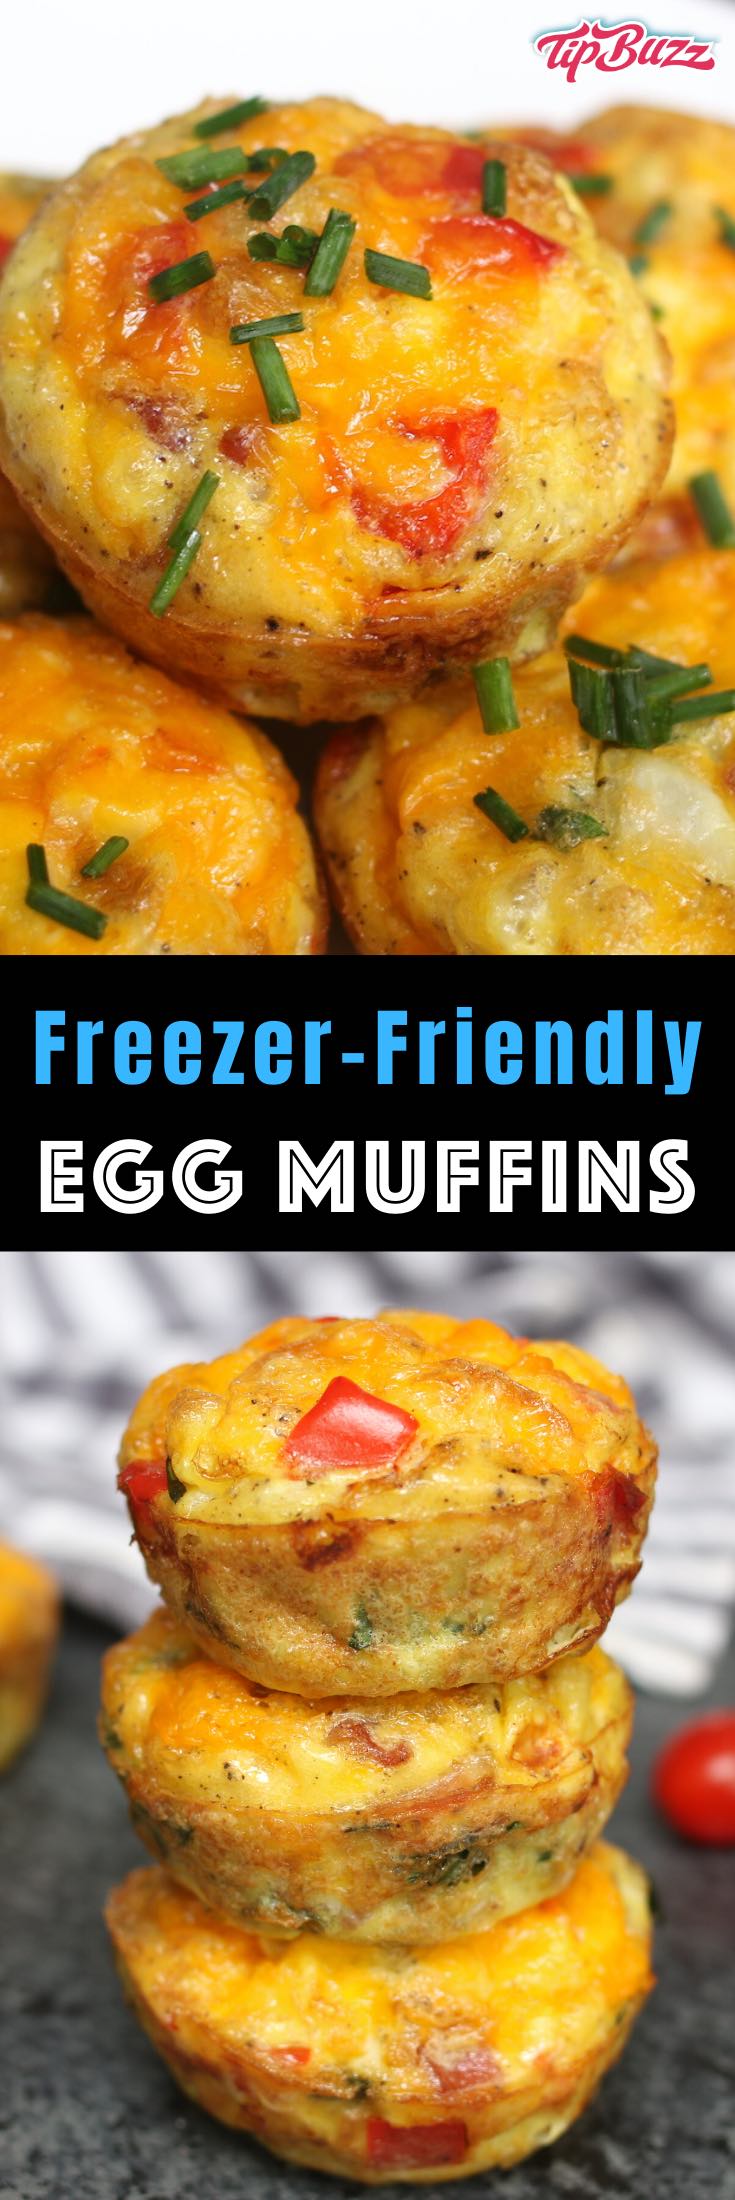 Freezer-friendly Egg Muffins are made with eggs, cheese, bacon, spinach, onions, and bell peppers. An easy make-ahead recipe, they only take a few minutes to throw together. These breakfast muffins are delicious, healthy and nutritious, perfect for busy mornings!